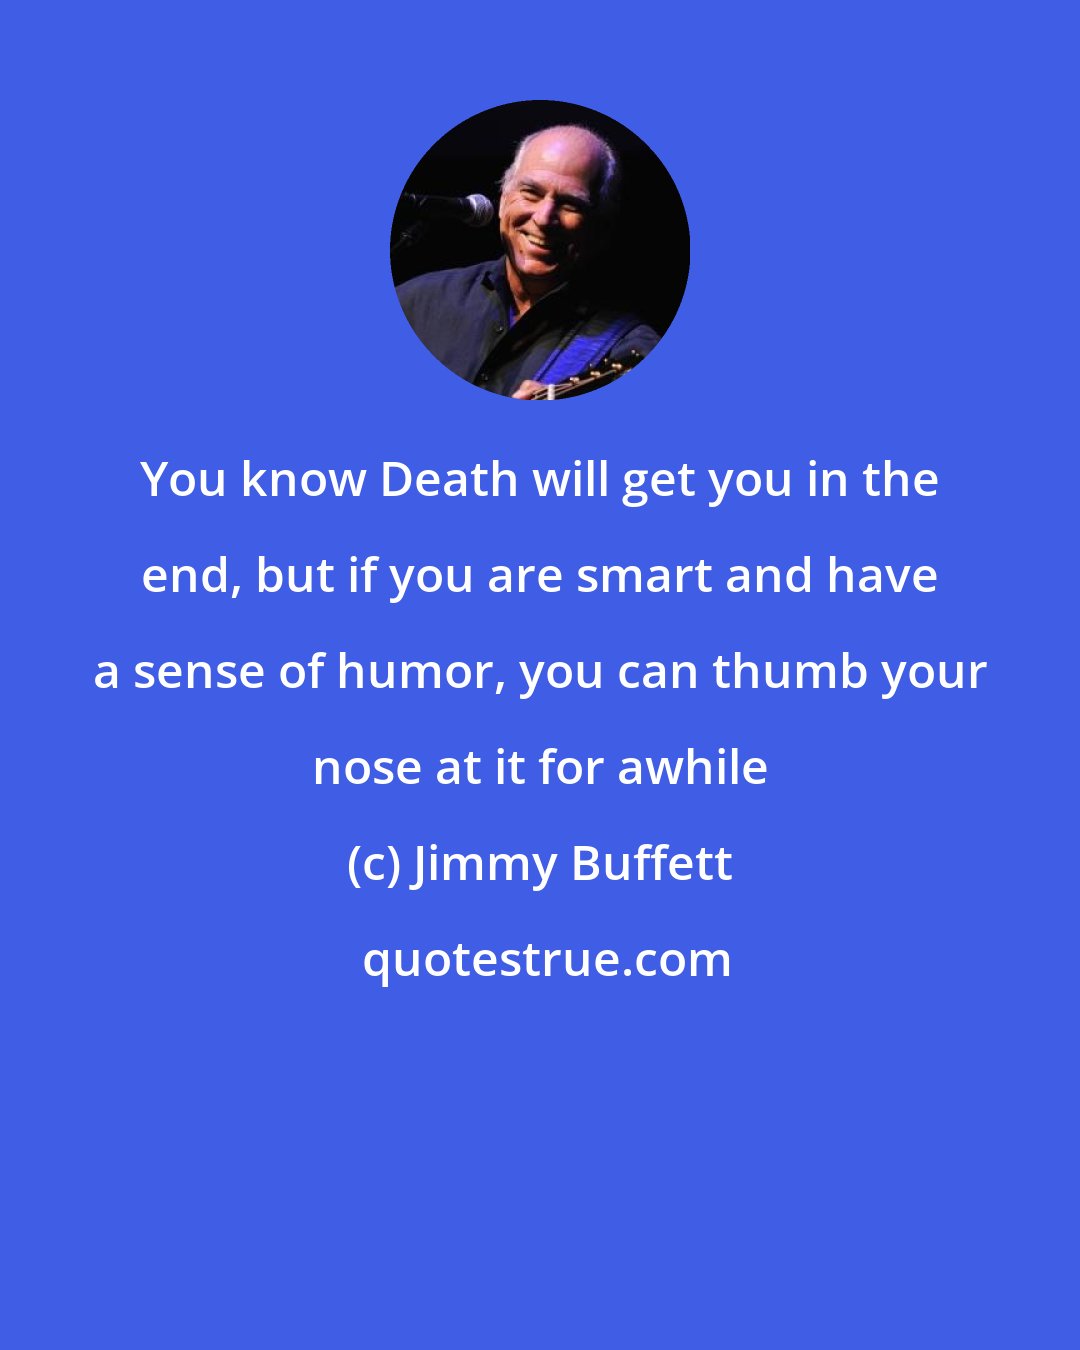 Jimmy Buffett: You know Death will get you in the end, but if you are smart and have a sense of humor, you can thumb your nose at it for awhile